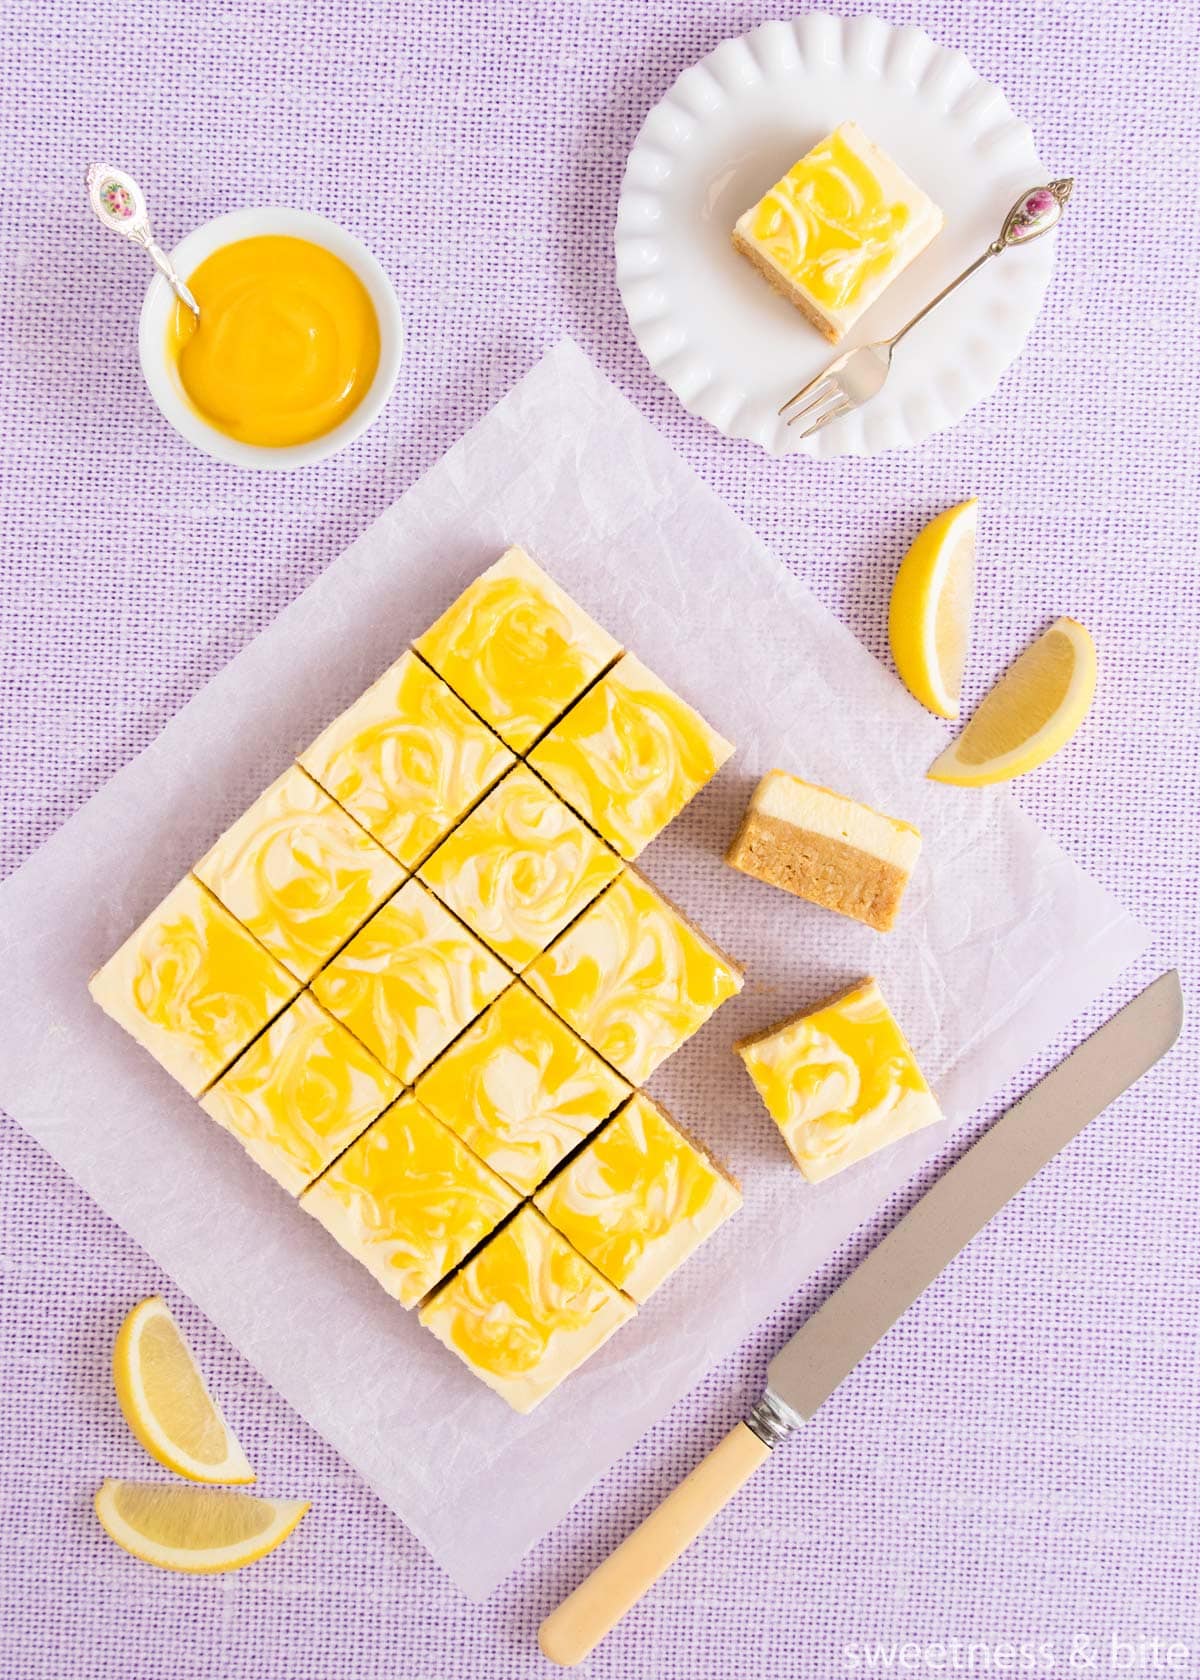 The slice, cut into squares on a pale purple background, with a knife and a bowl of lemon curd.